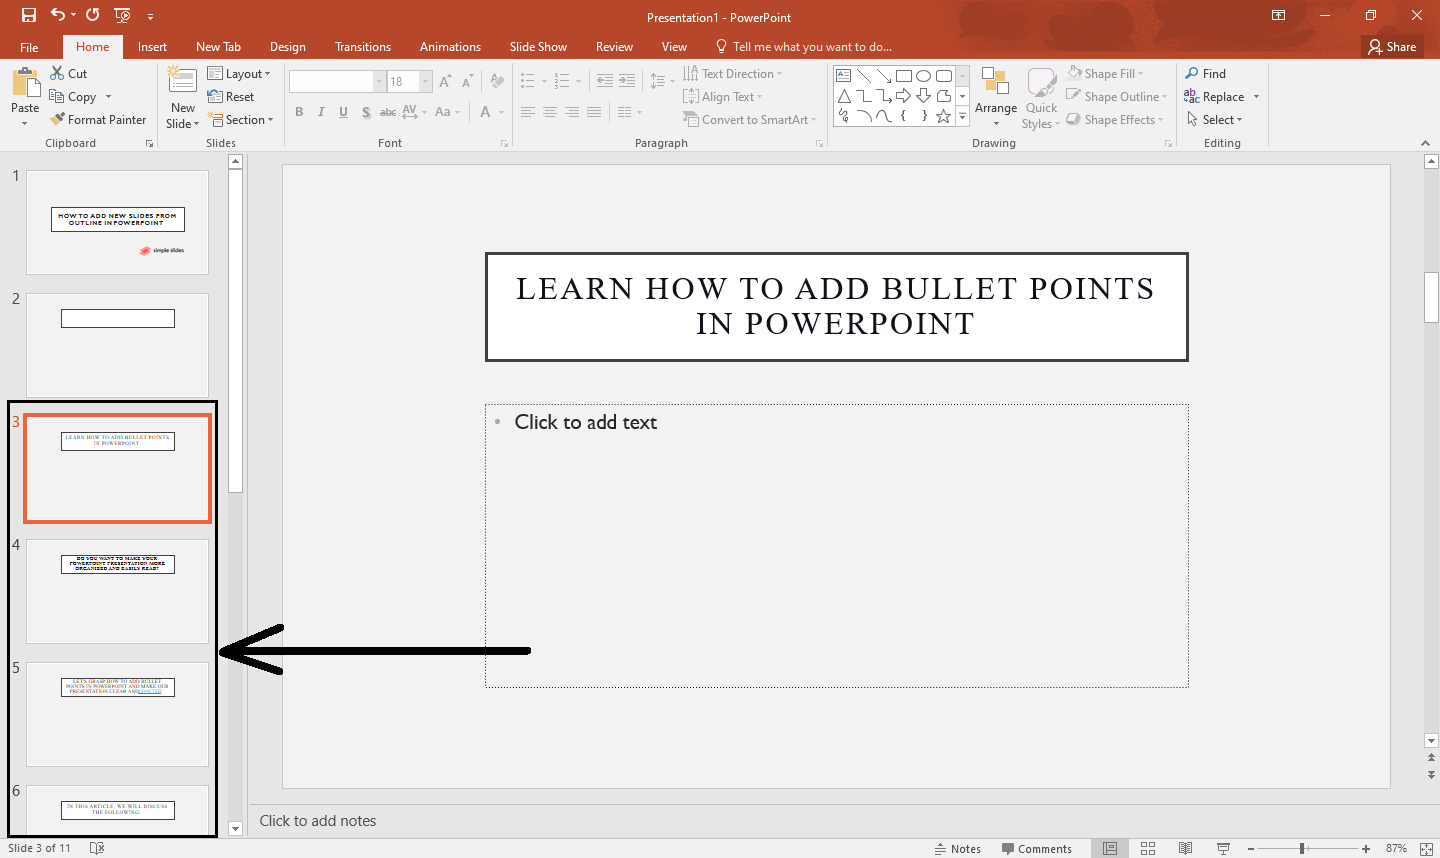 once you select "Insert" button, your outline in word is now in your PowerPoint presentation.